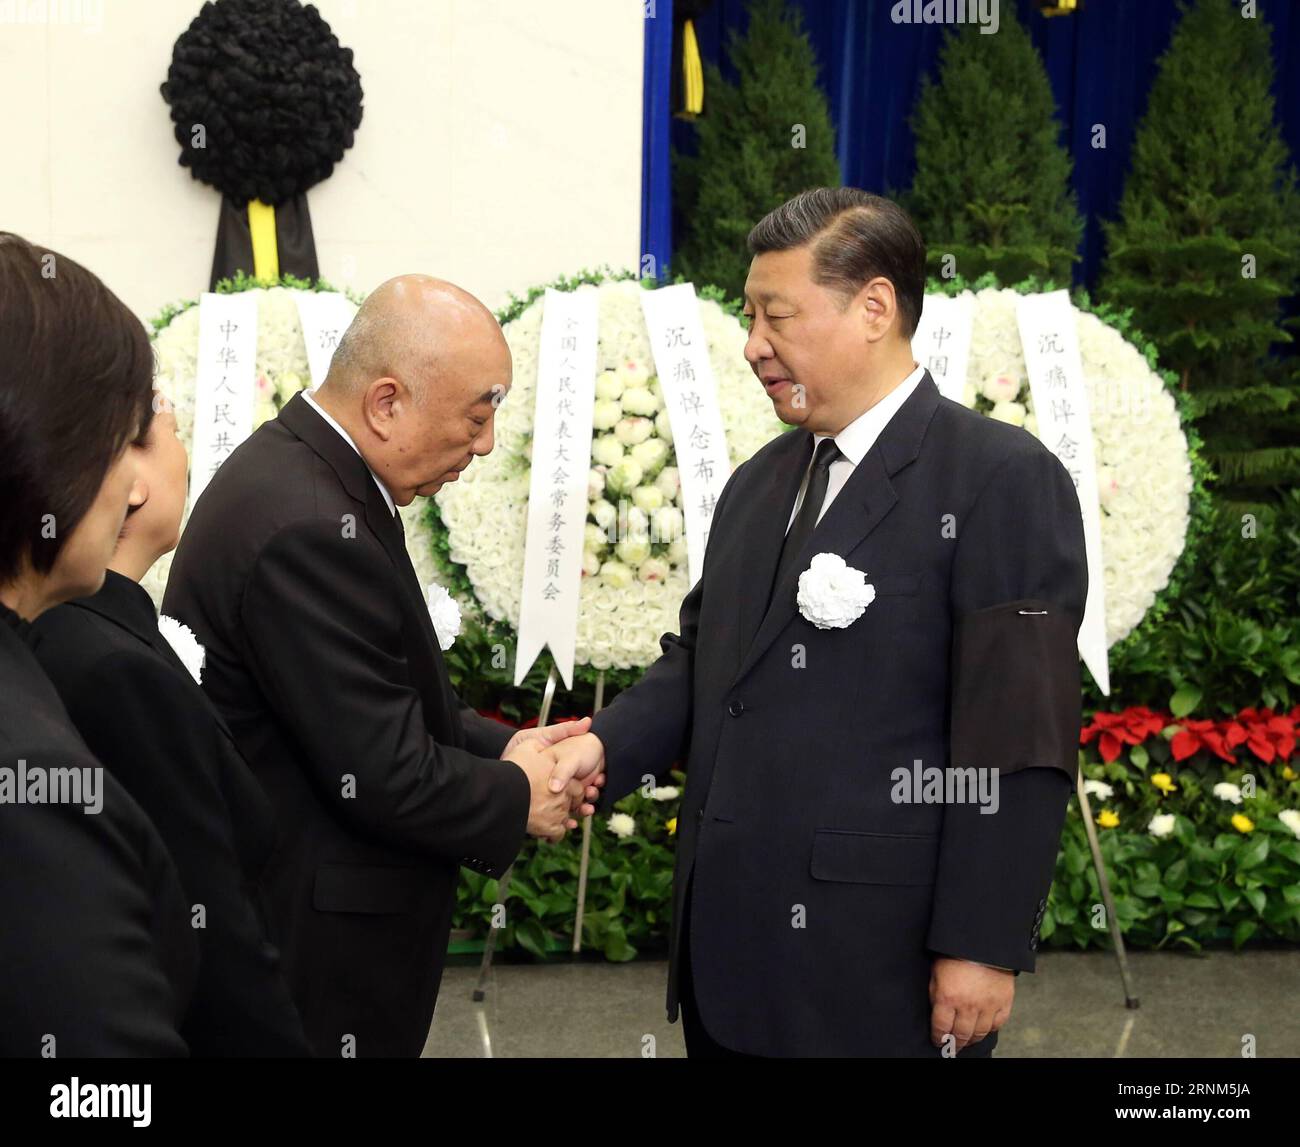 (170511) -- BEIJING, May 11, 2017 -- Chinese President Xi Jinping (R) shakes hands with a family member of Buhe, a former vice chairman of the Standing Committee of the National People s Congress (NPC), at the funeral of Buhe at the Babaoshan Revolutionary Cemetery in Beijing, capital of China, May 11, 2017. The cremation of Buhe was held Thursday in Beijing. Buhe died in Beijing on May 5. He was 91. President Xi Jinping, Premier Li Keqiang, and other senior leaders including Zhang Dejiang, Yu Zhengsheng, Liu Yunshan, Wang Qishan and Zhang Gaoli, as well as former leader Hu Jintao attended the Stock Photo